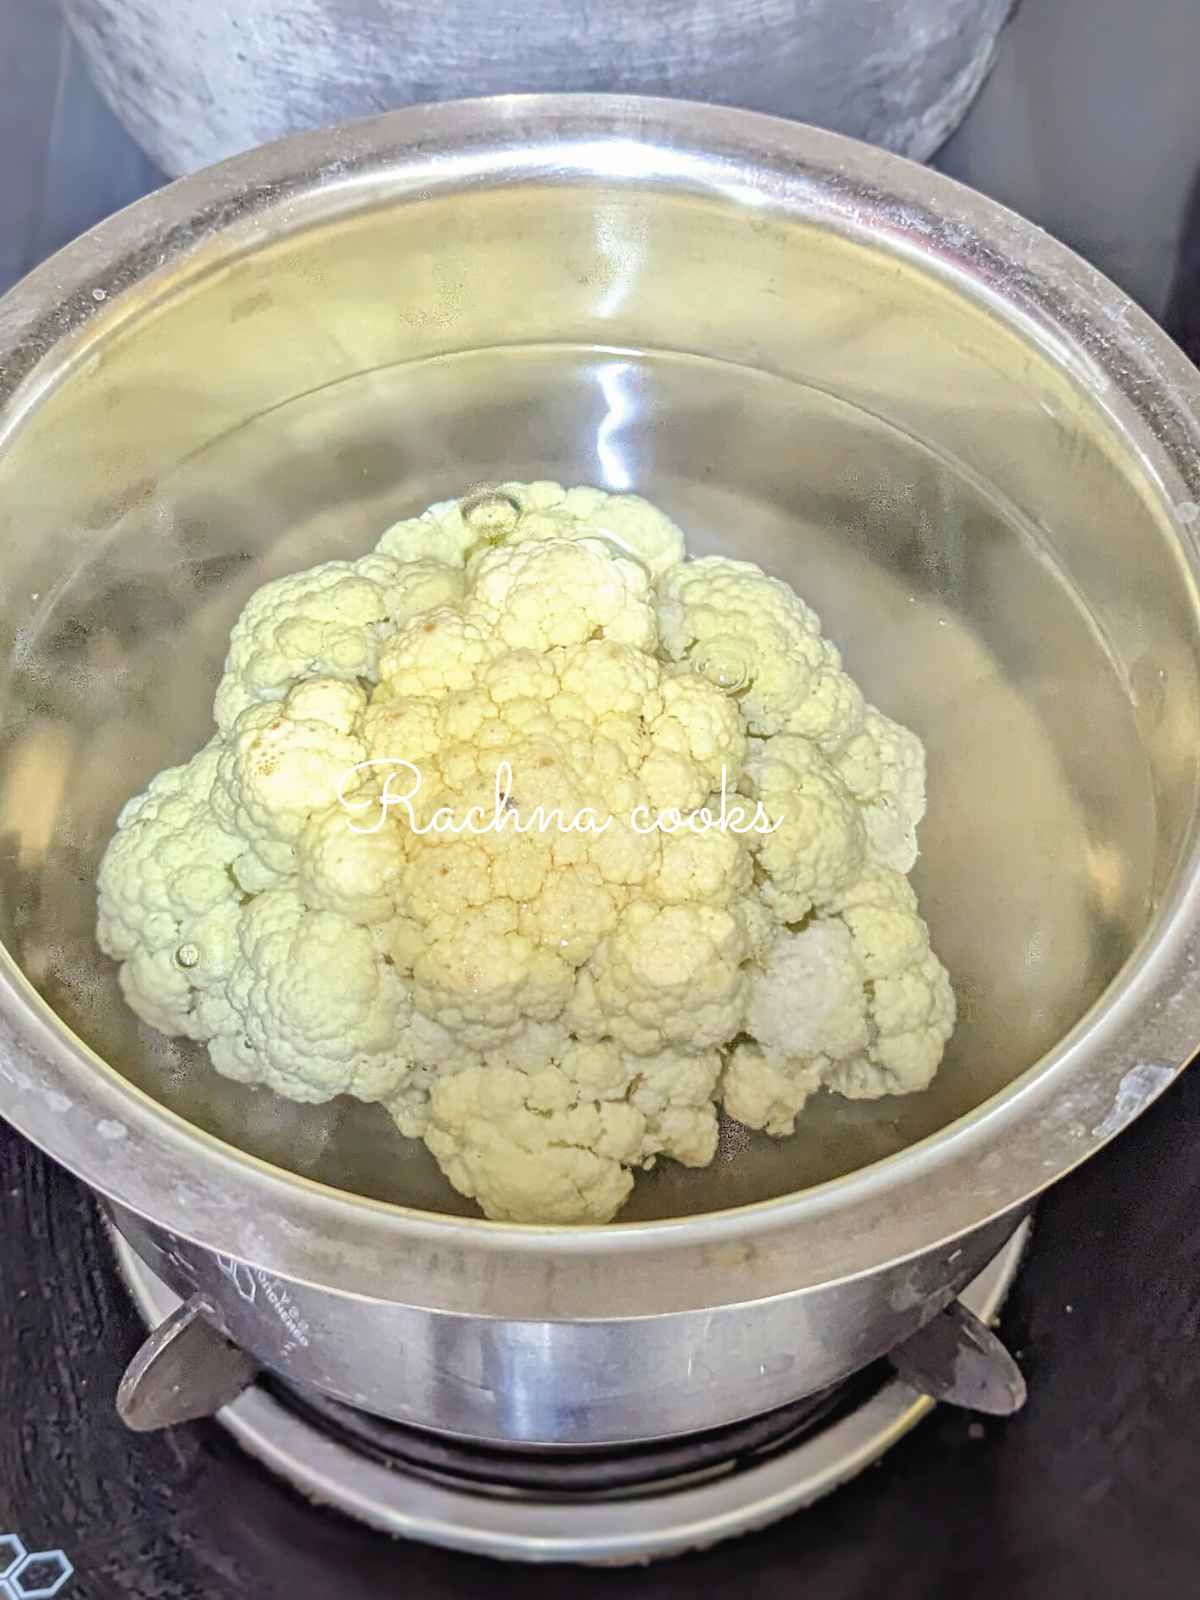 Whole cauliflower immersed in boiling water.